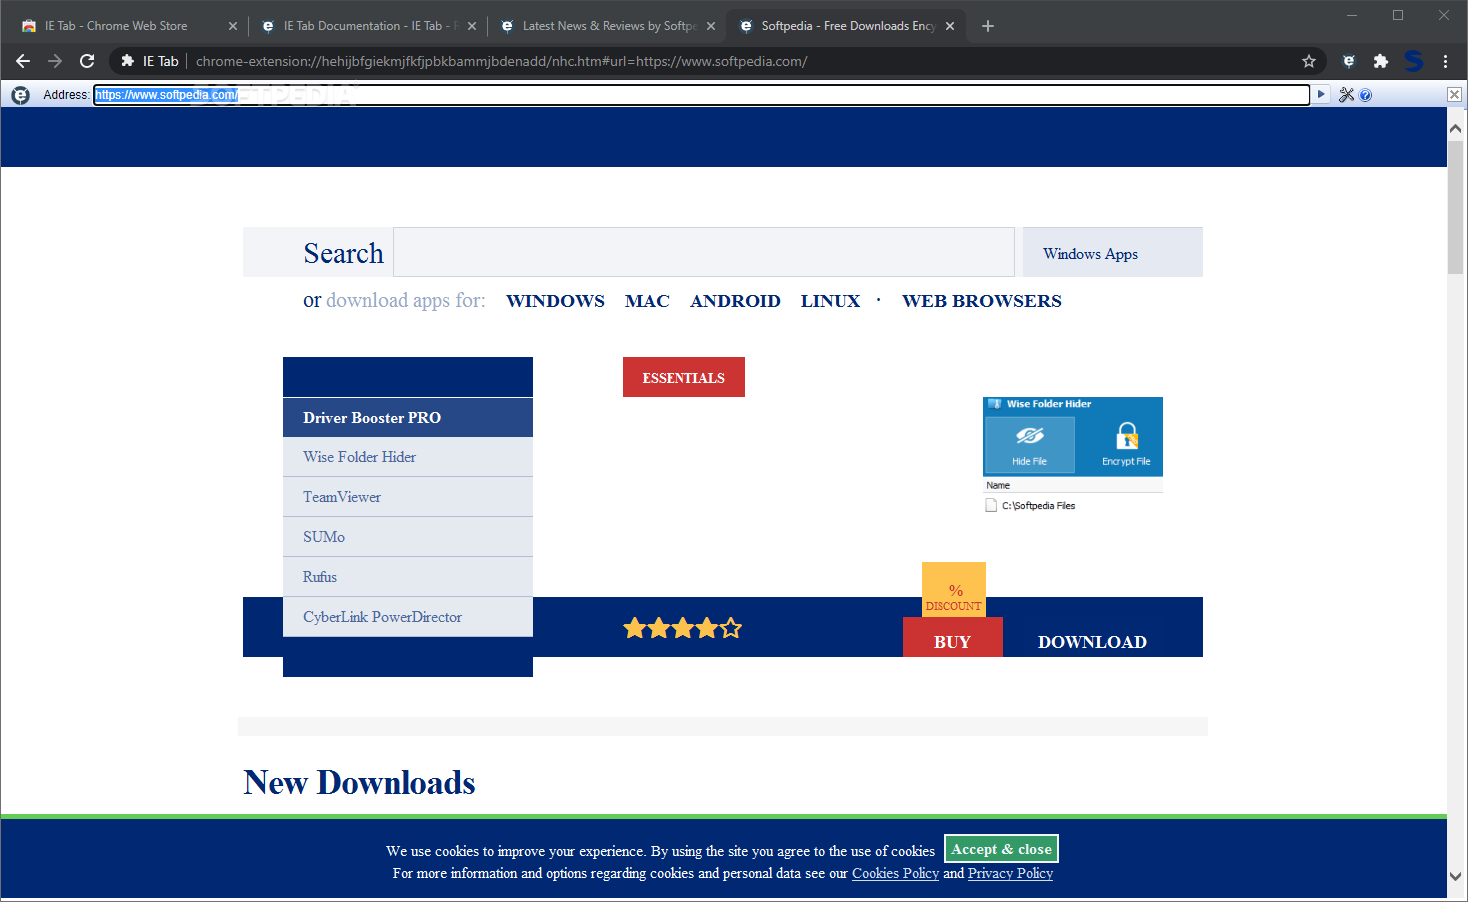 Download Download IE Tab 16.1.19.1 Free